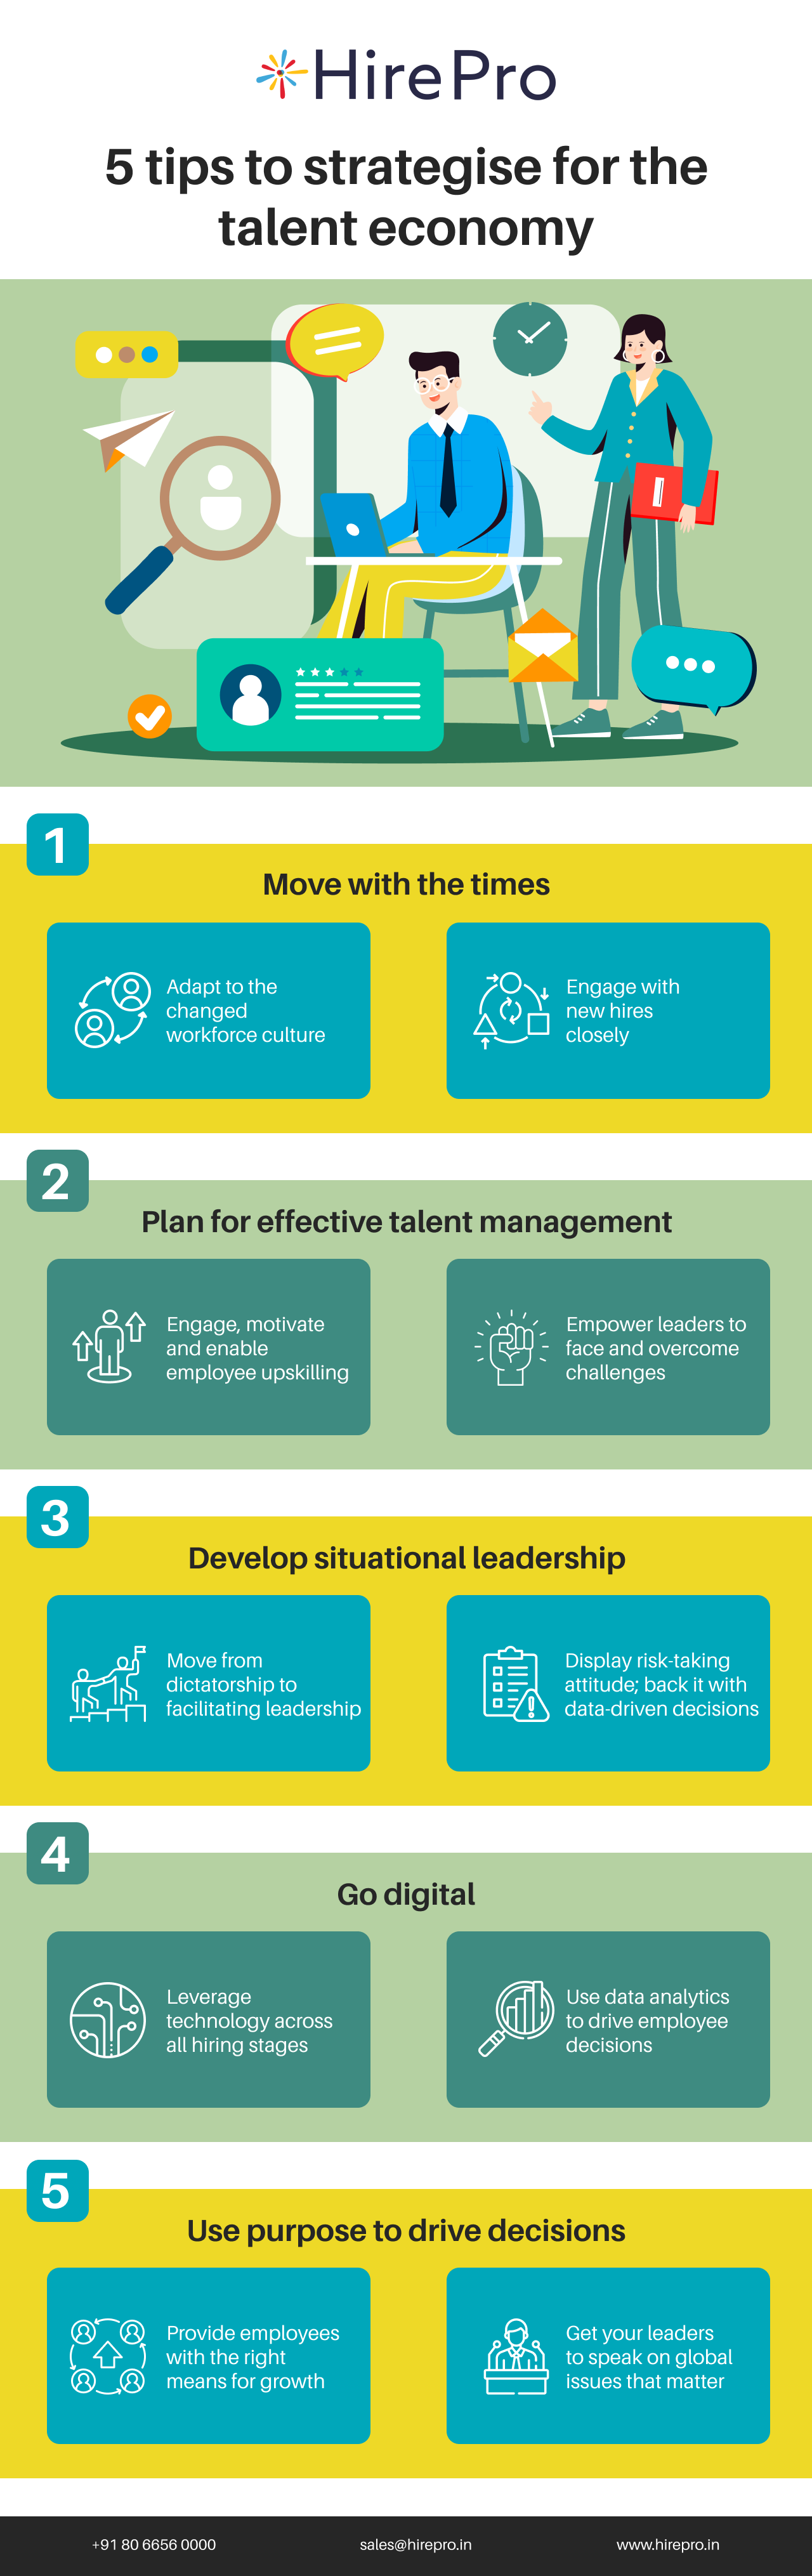 5 tips to strategise for the talent economy